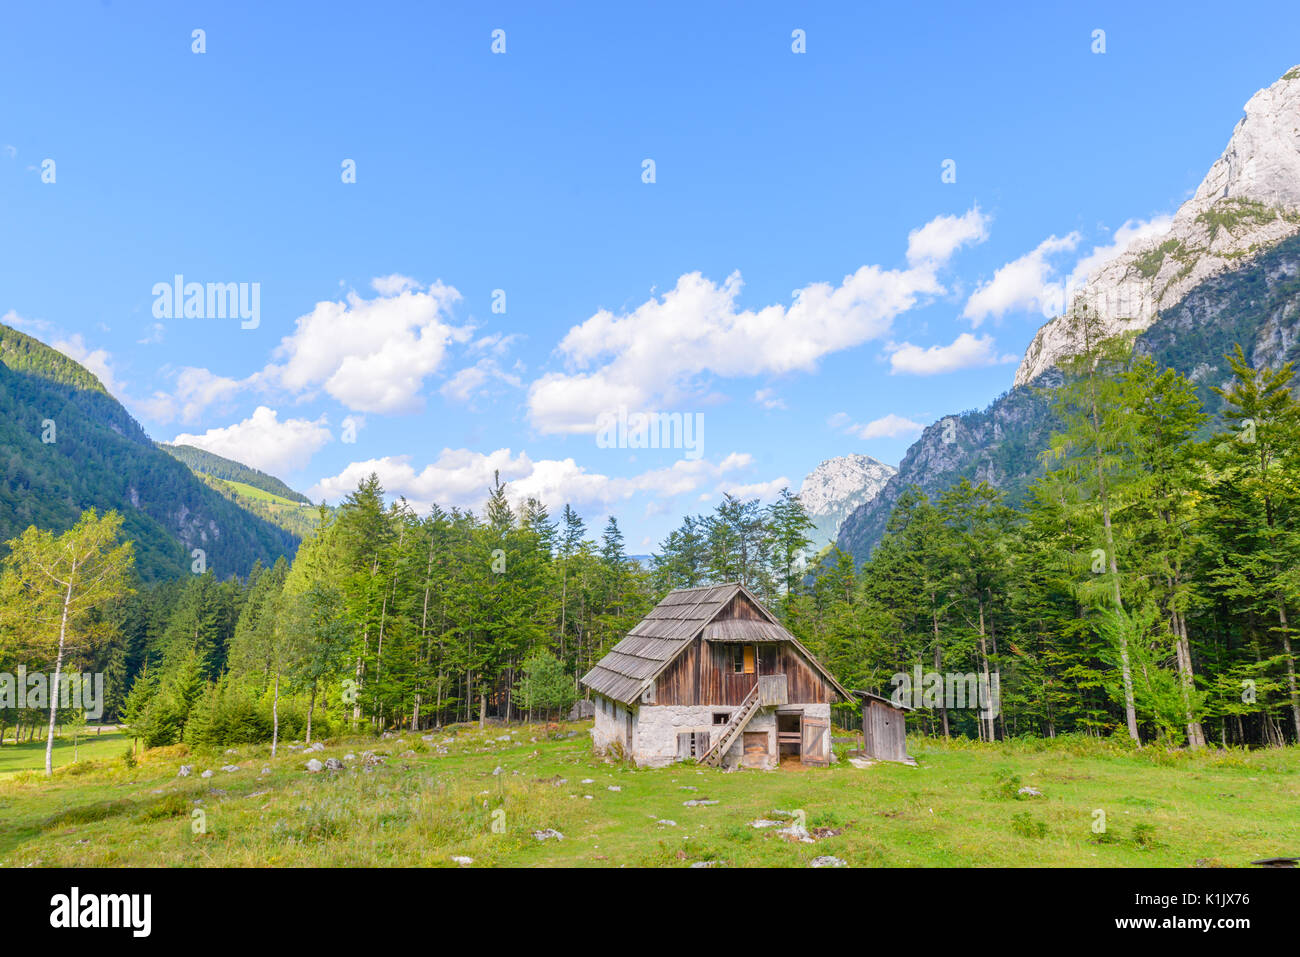 Mountain cabin, hut in European Alps, located in Robanov kot, Slovenia, popular hiking and climbing place with picturescue view Stock Photo